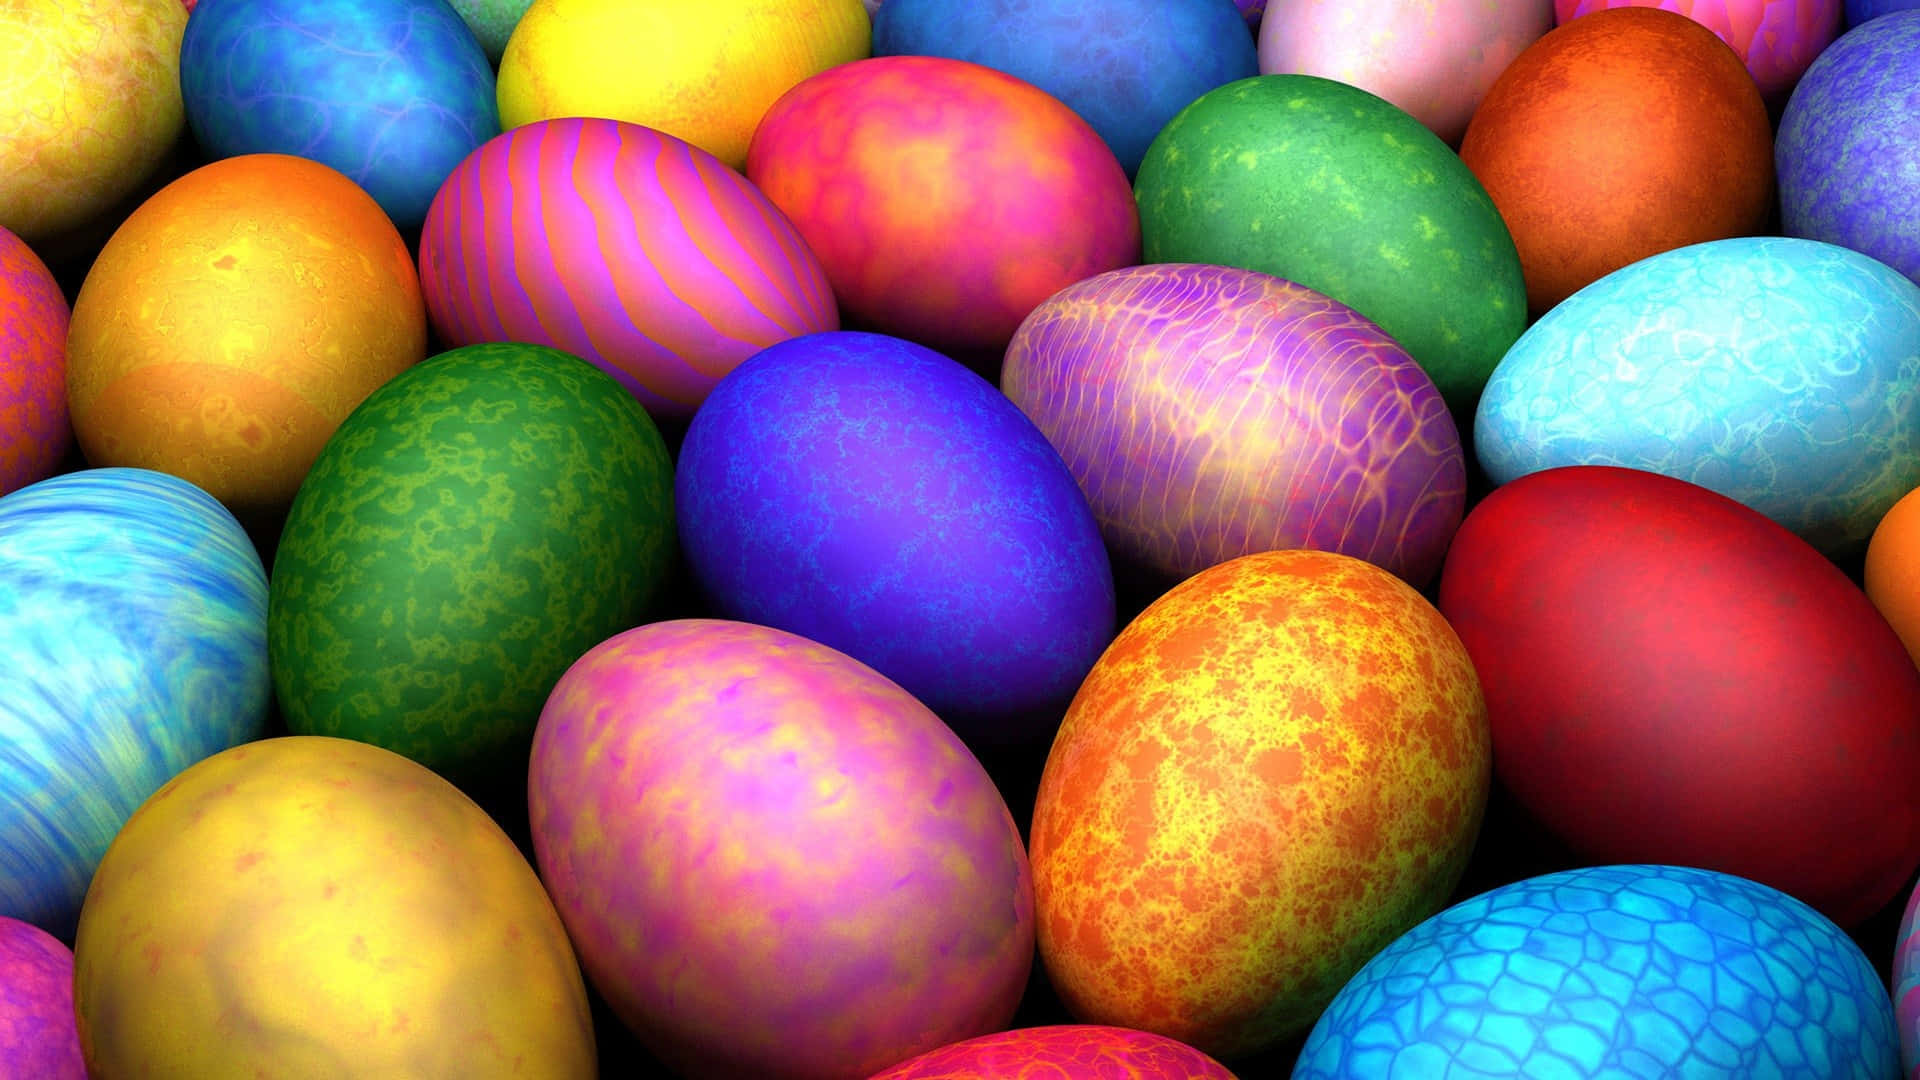 A Group Of Colorful Easter Eggs Are Arranged In A Row